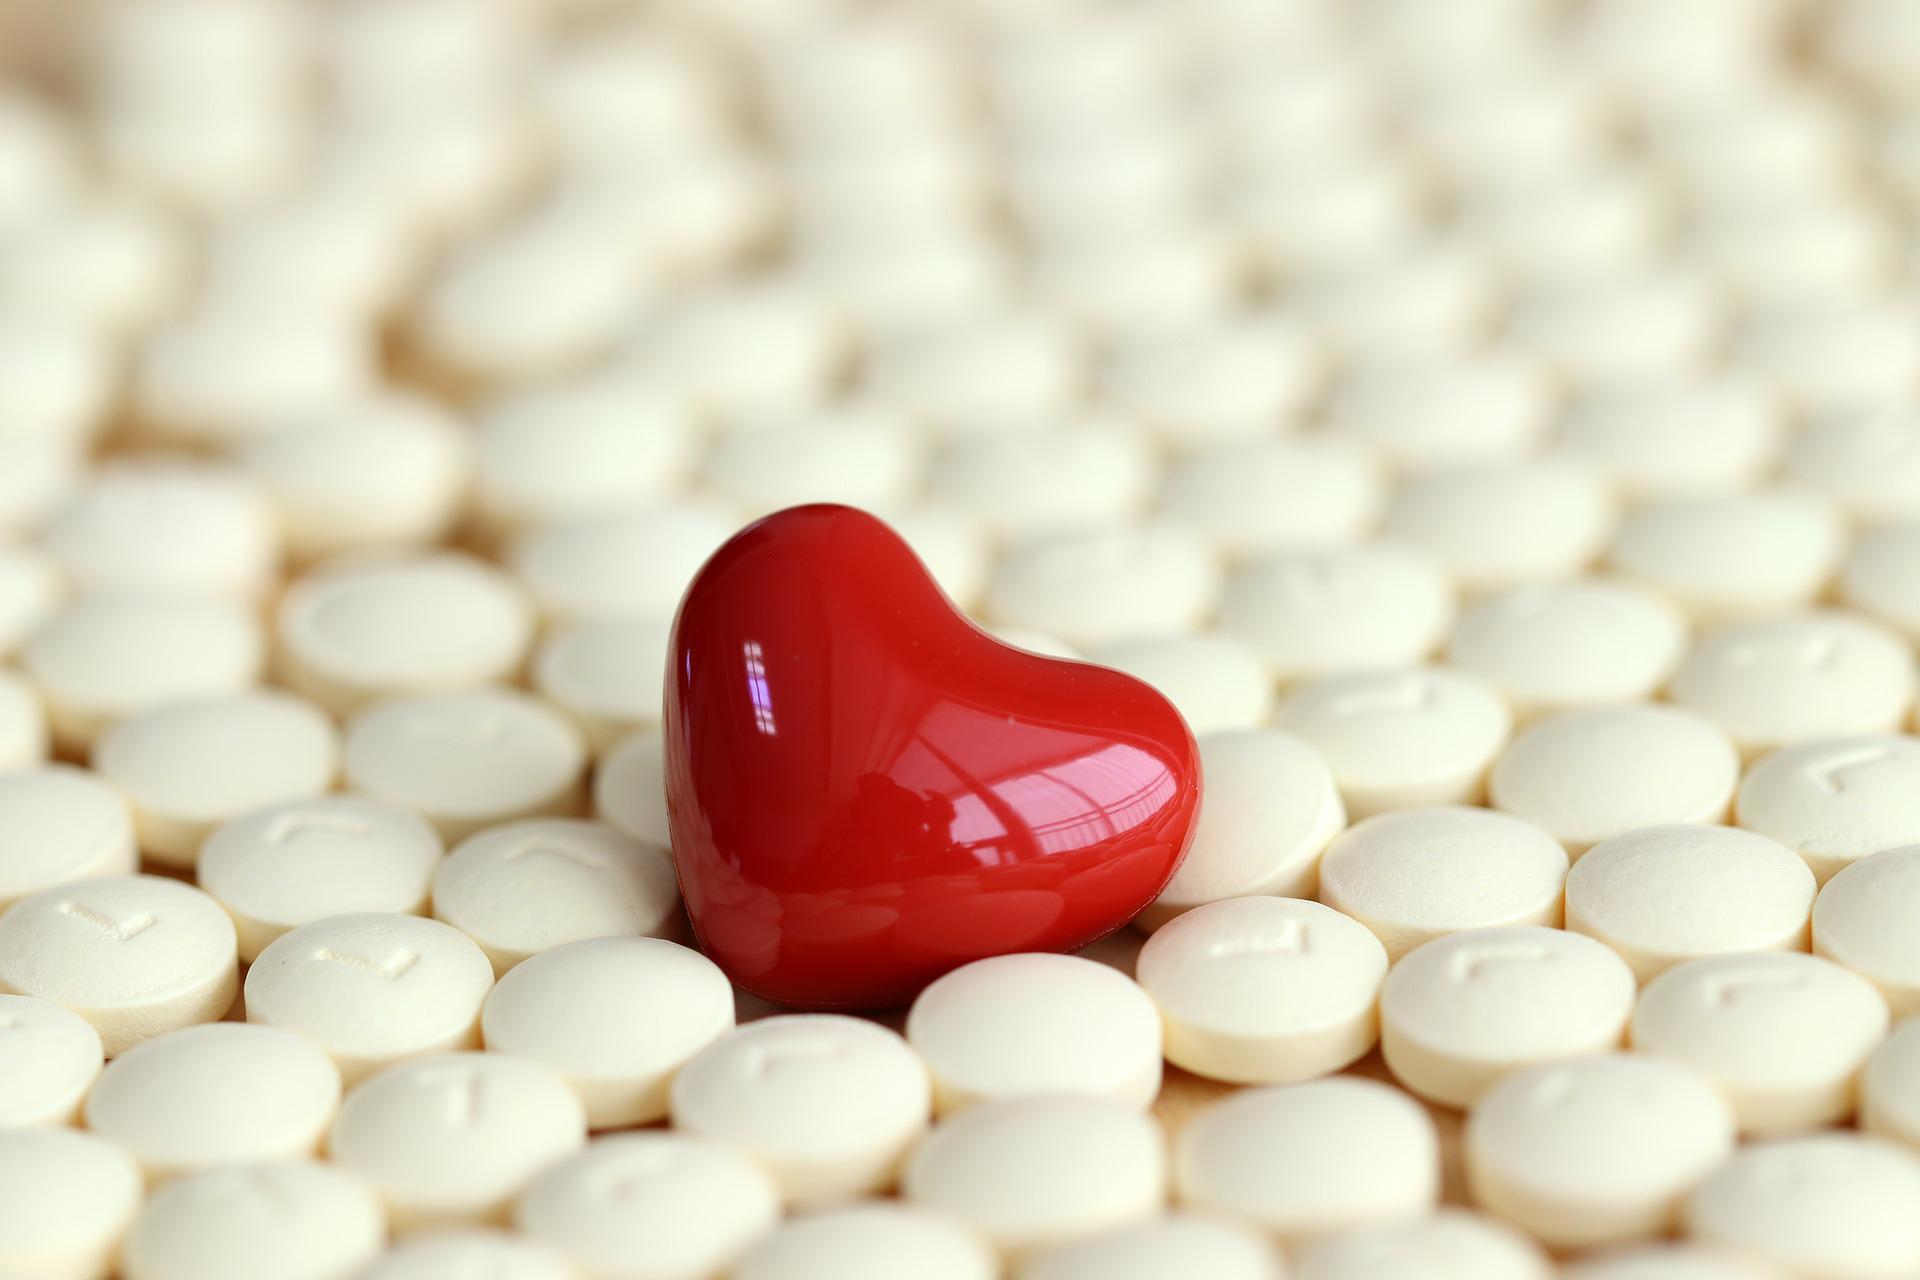 Heart shaped medicine in a pile of medicines